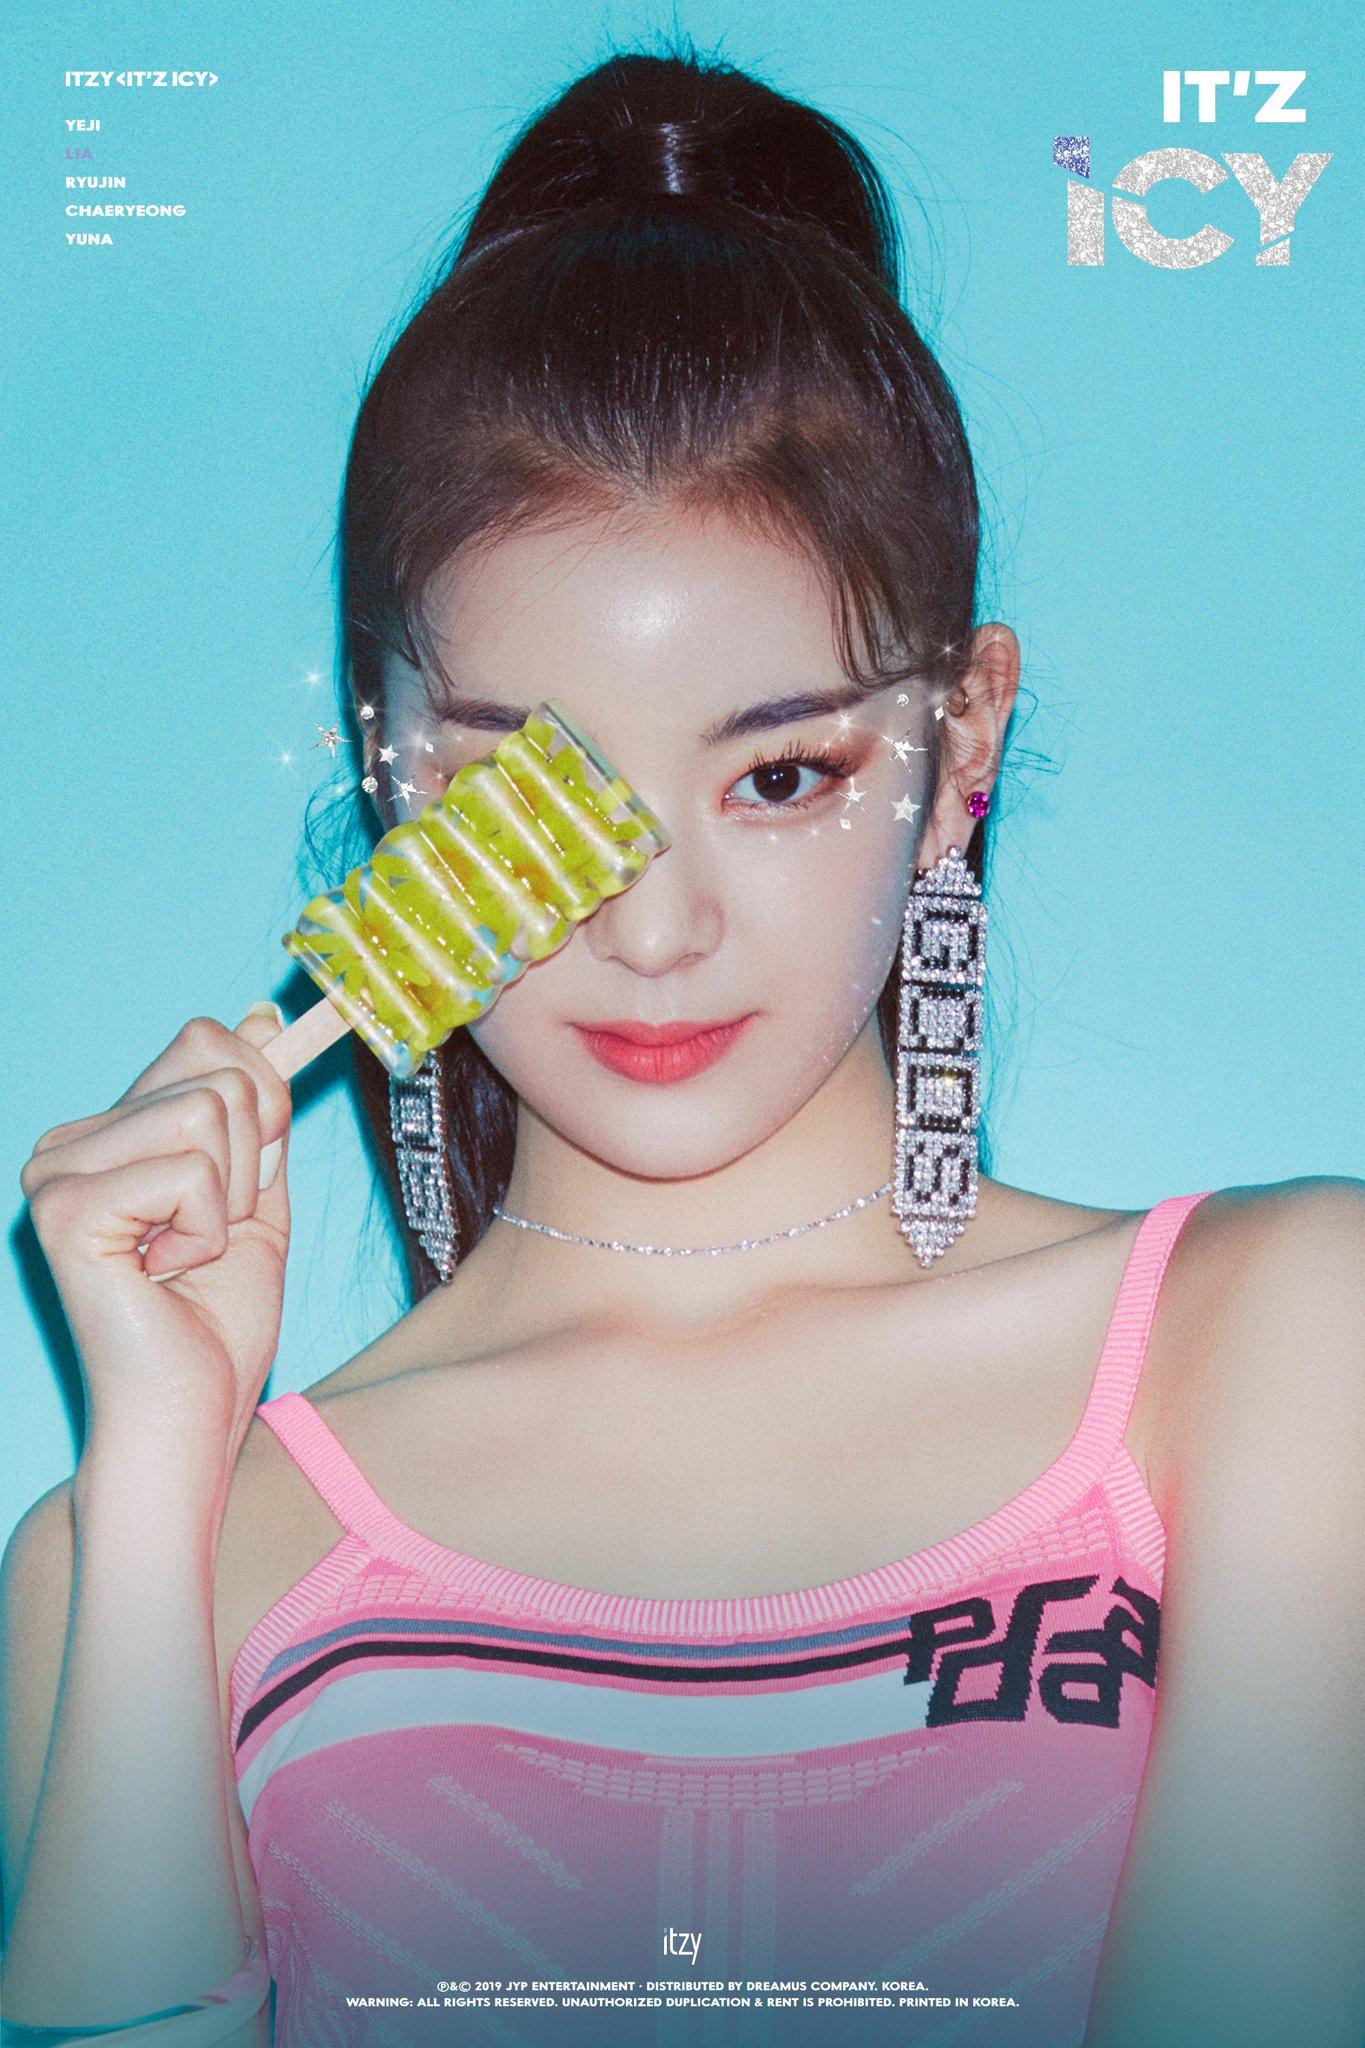 ITZY teases individual teaser image for 'IT'z ICY'